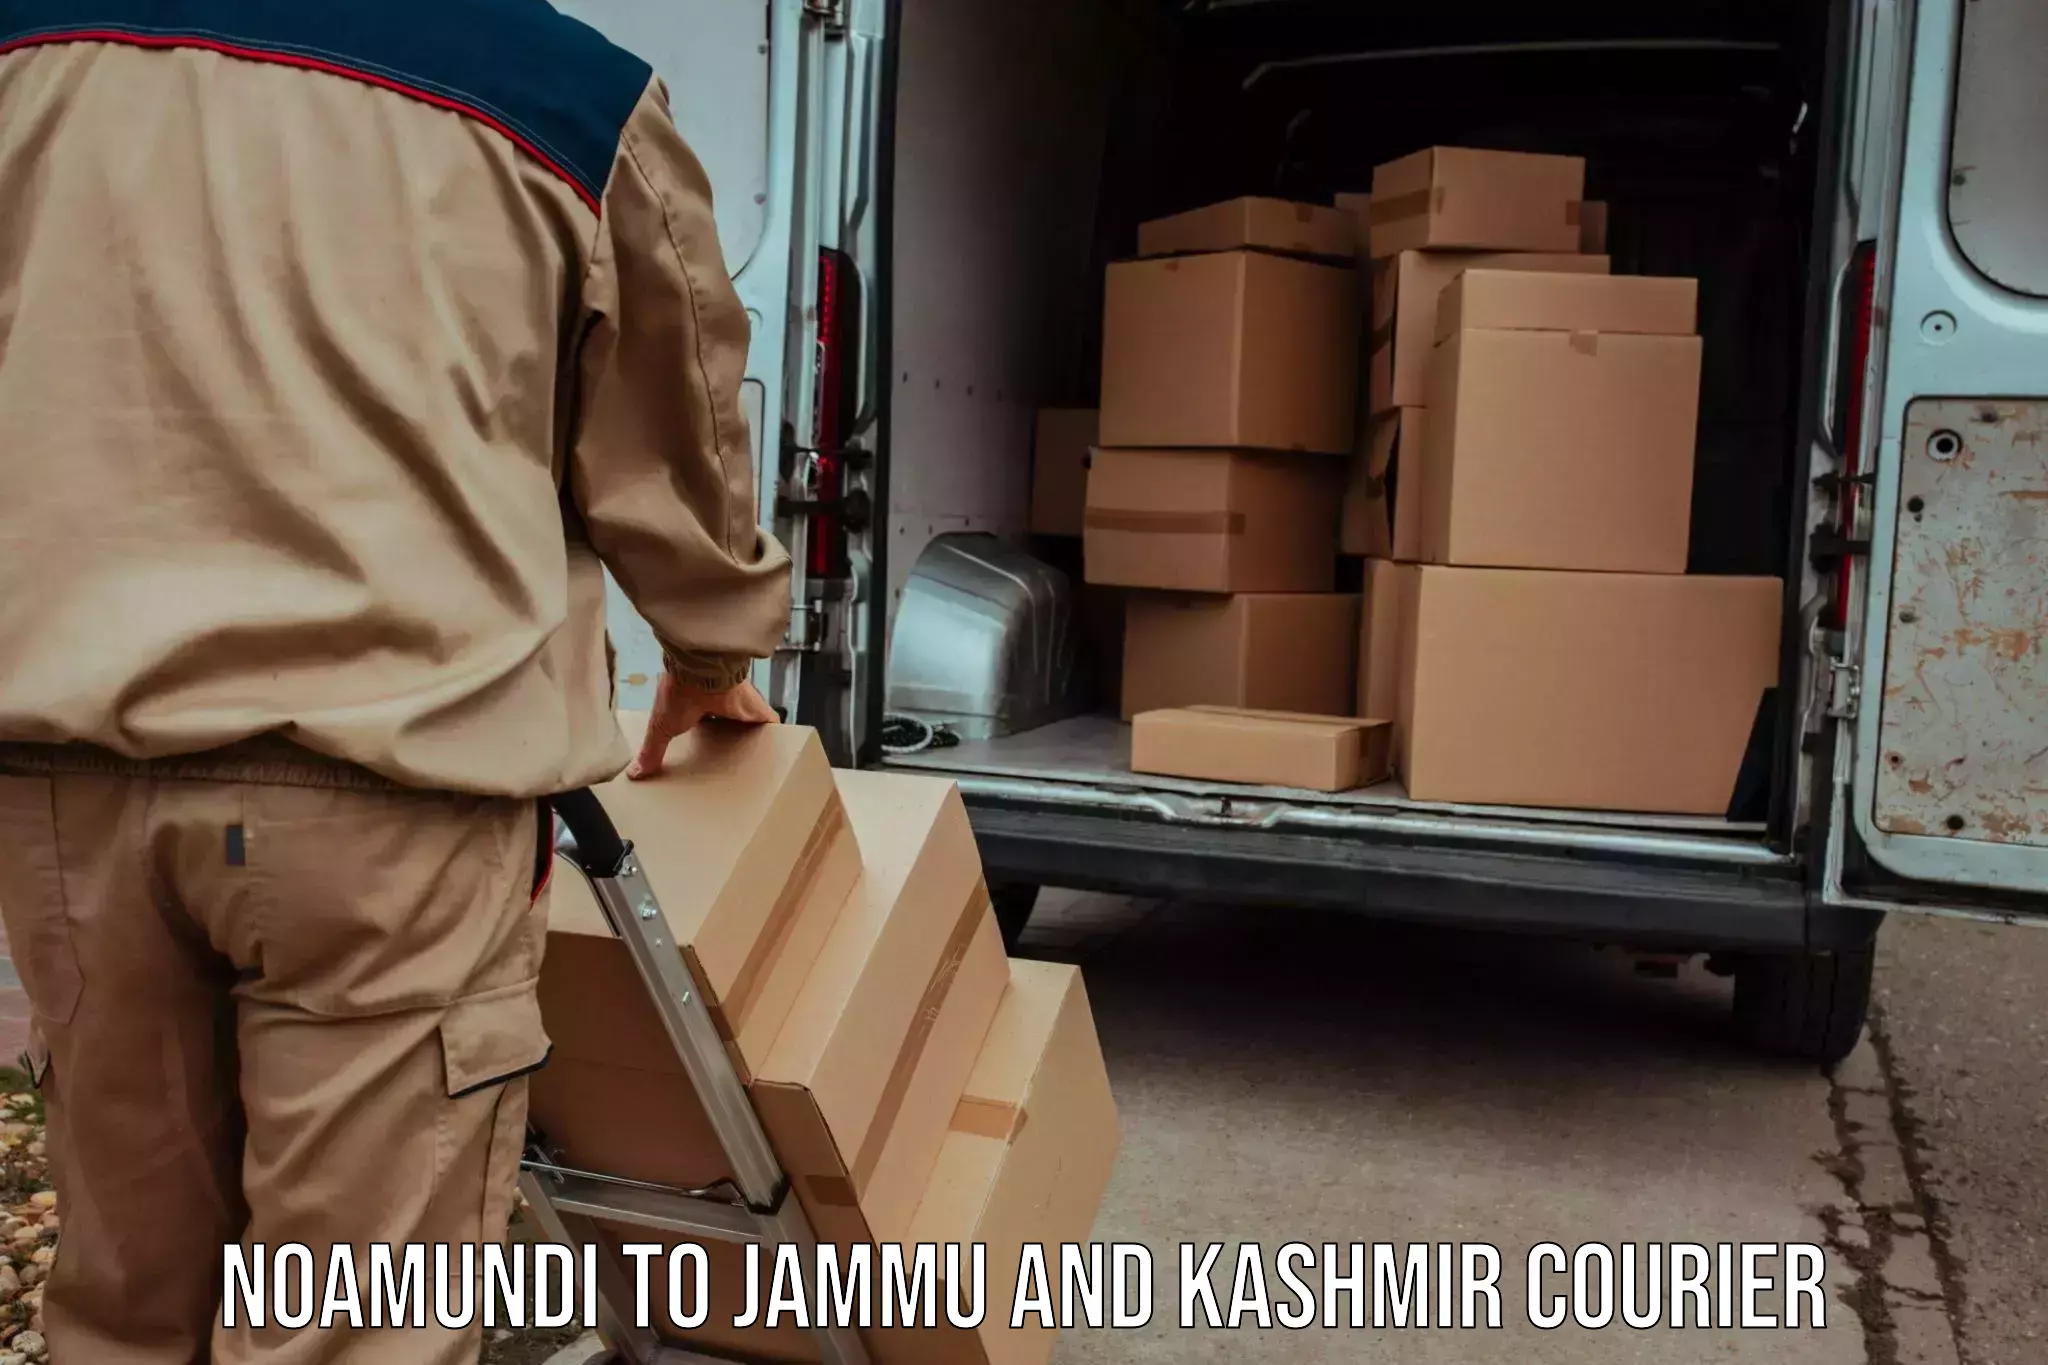 24/7 courier service in Noamundi to Jammu and Kashmir